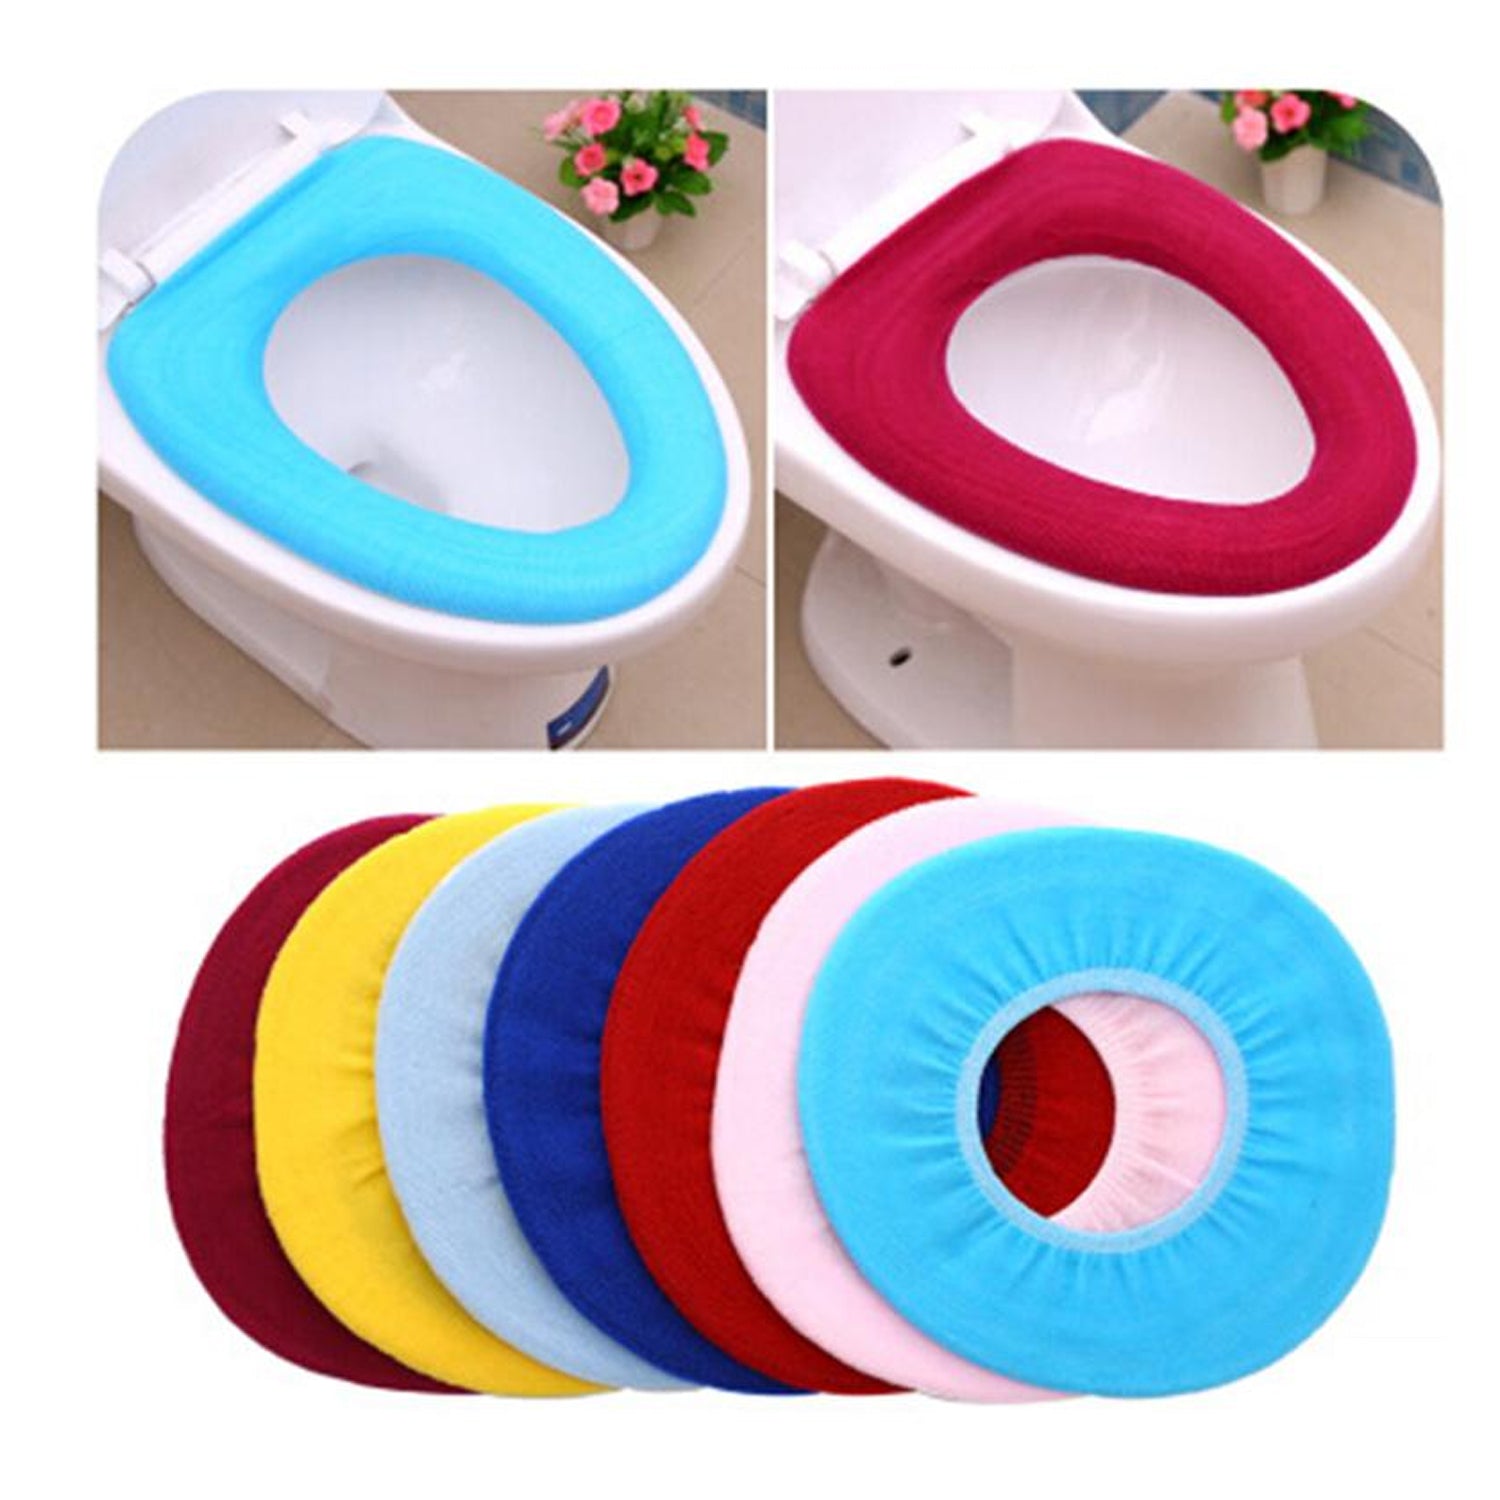 4768 Bathroom Soft Thicker Warmer Stretchable Washable Cloth Toilet Seat Cover Pads (1pc) DeoDap